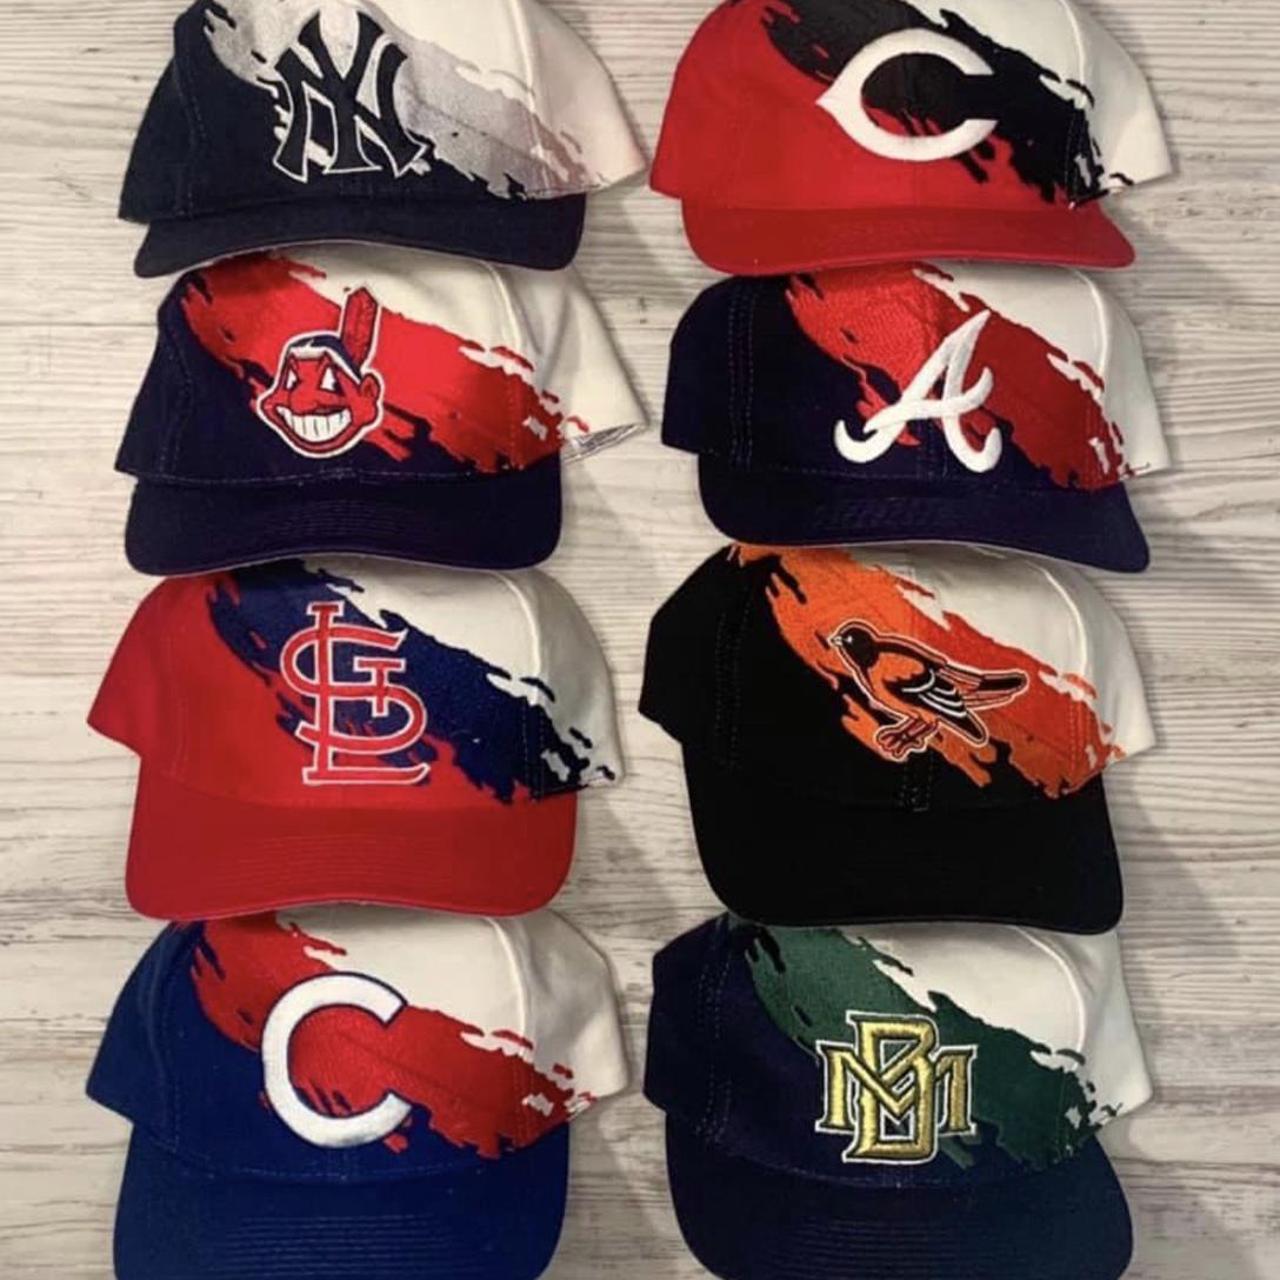 Rare vintage snapback hats for sale now! Dm to purchase.